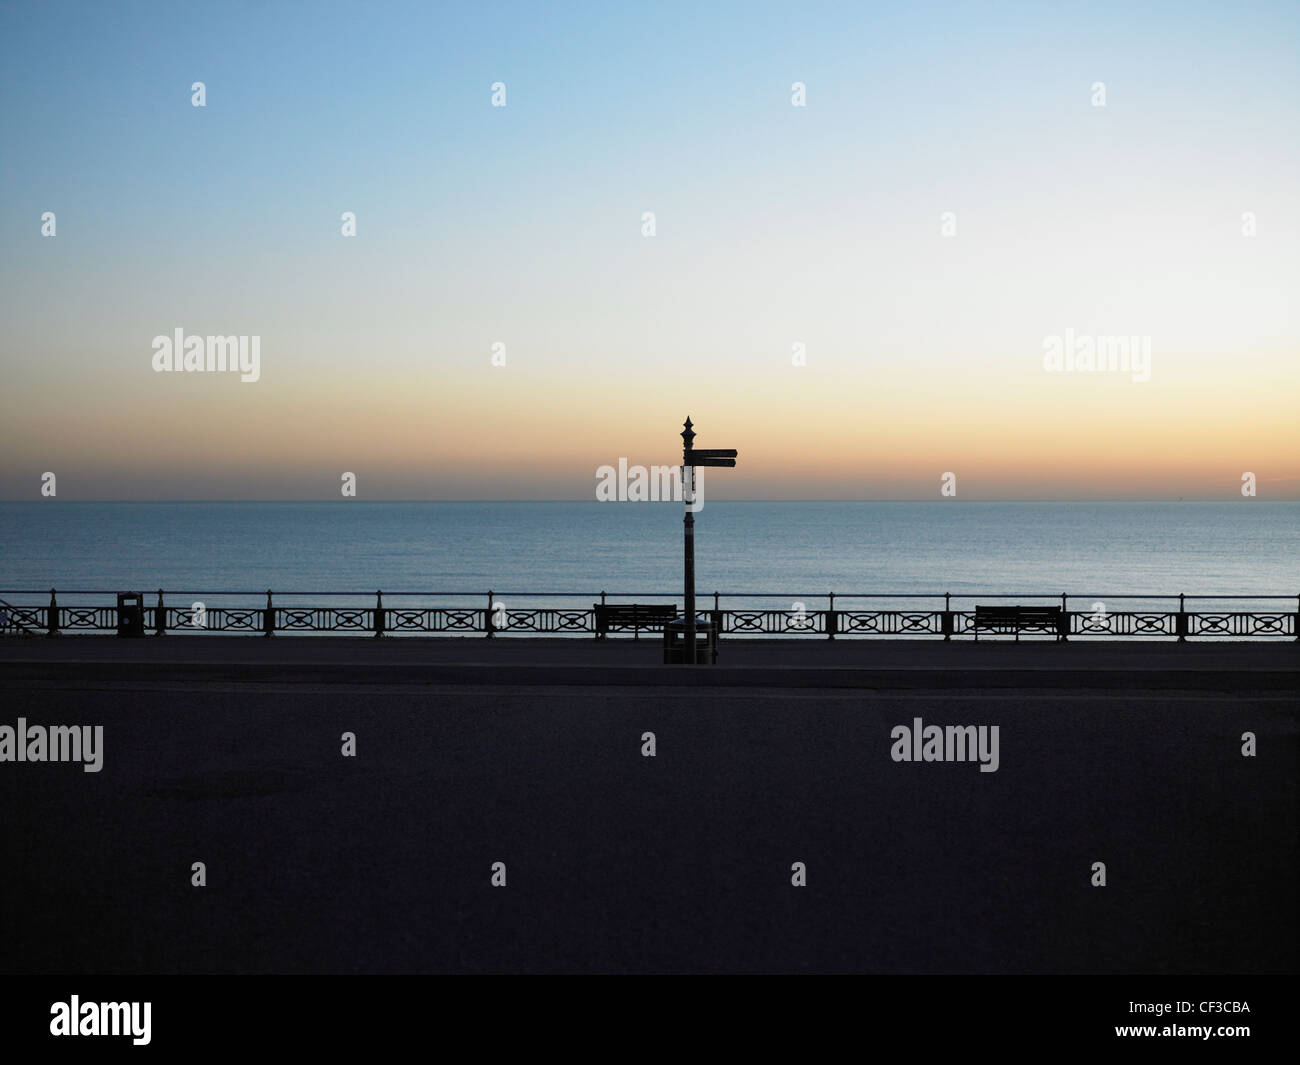 A view out to a calm sea at dusk from the promenade in Hove. Stock Photo